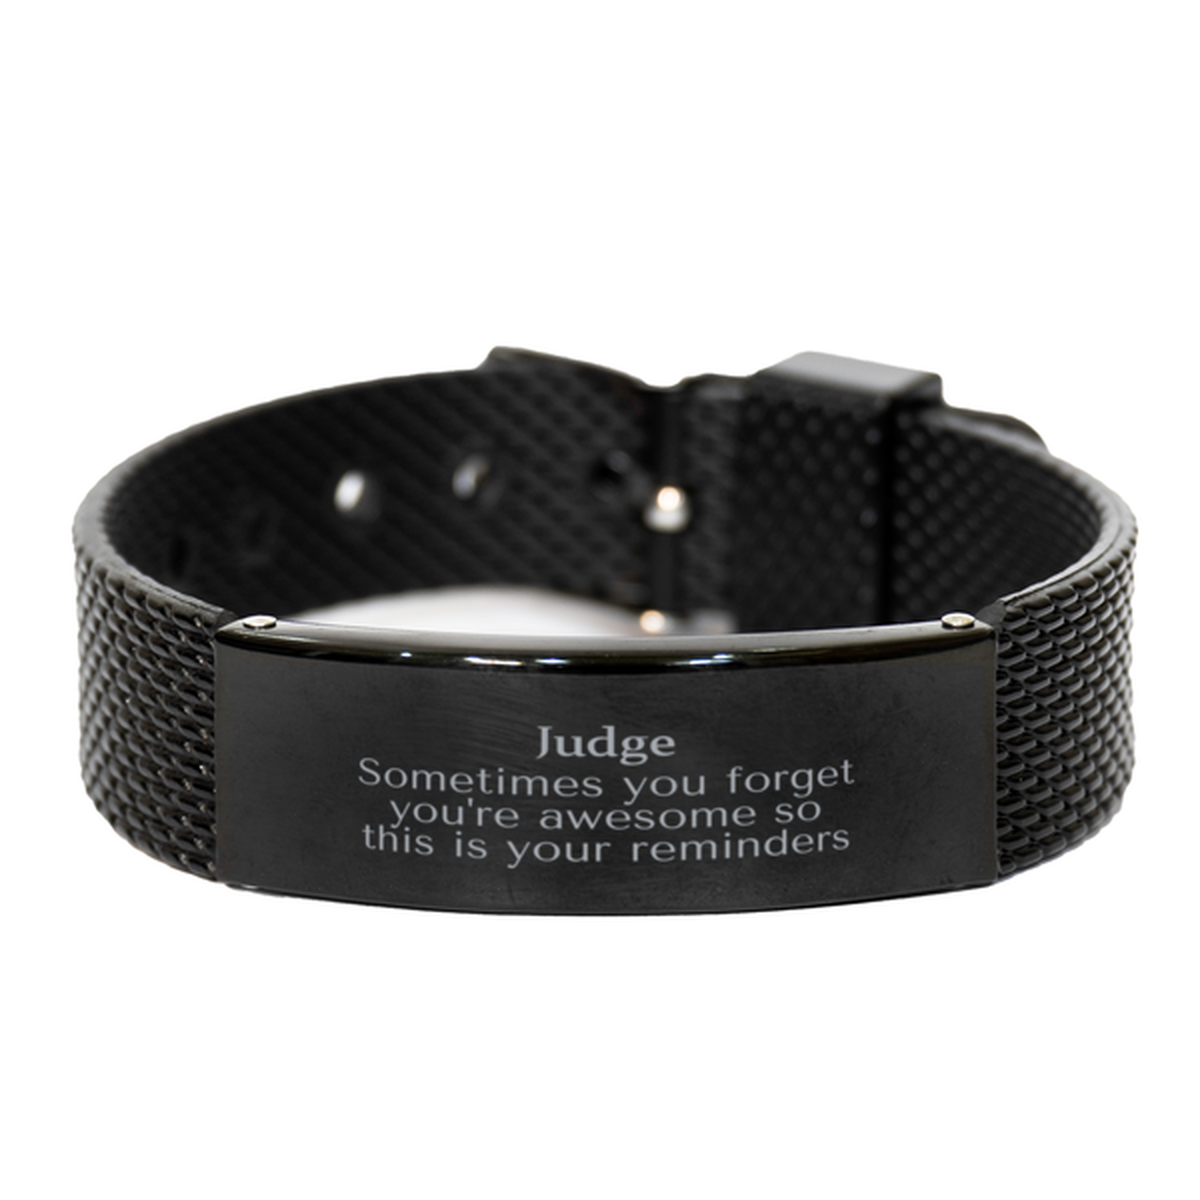 Sentimental Judge Black Shark Mesh Bracelet, Judge Sometimes you forget you're awesome so this is your reminders, Graduation Christmas Birthday Gifts for Judge, Men, Women, Coworkers